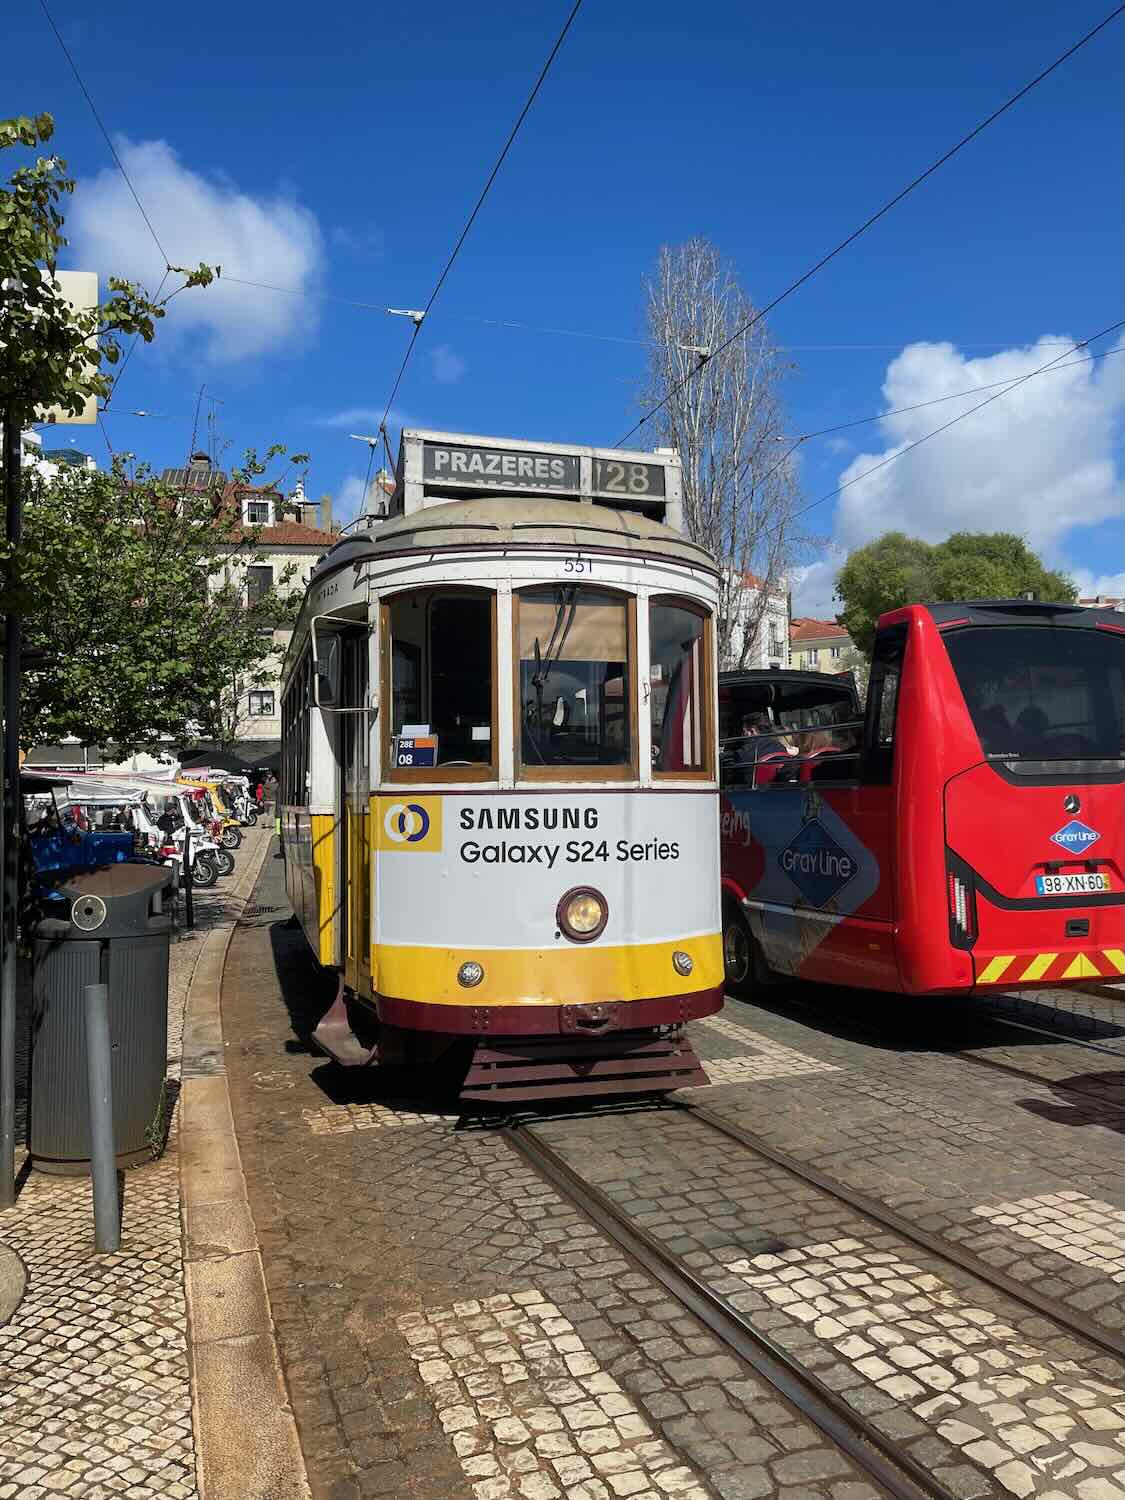 Lisbon's iconic Tram 28, adorned with a Samsung advertisement, waits for passengers against a backdrop of bright blue skies and city foliage.